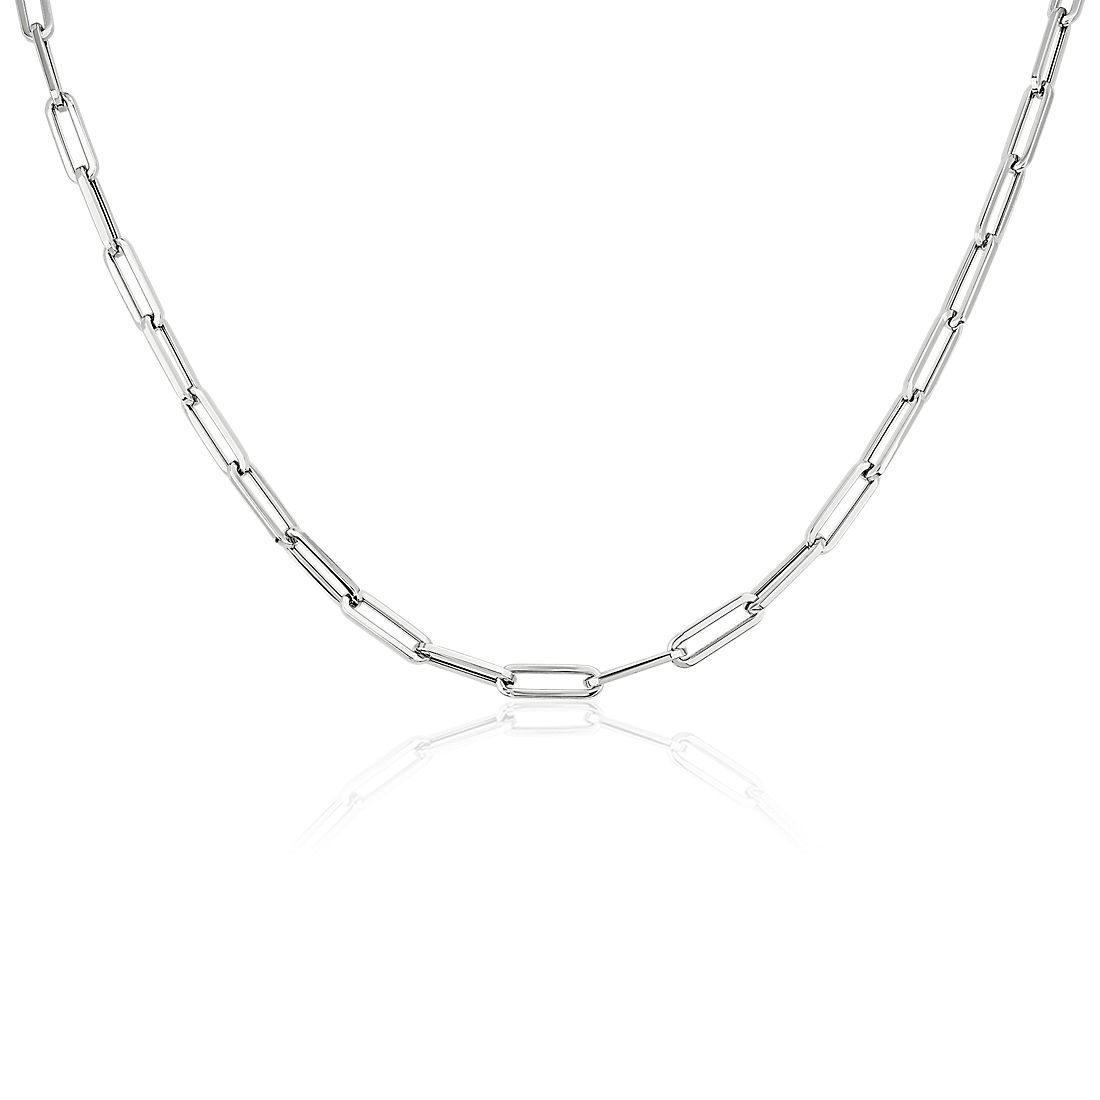 34" Paperclip Necklace in 14k Italian White Gold | Blue Nile